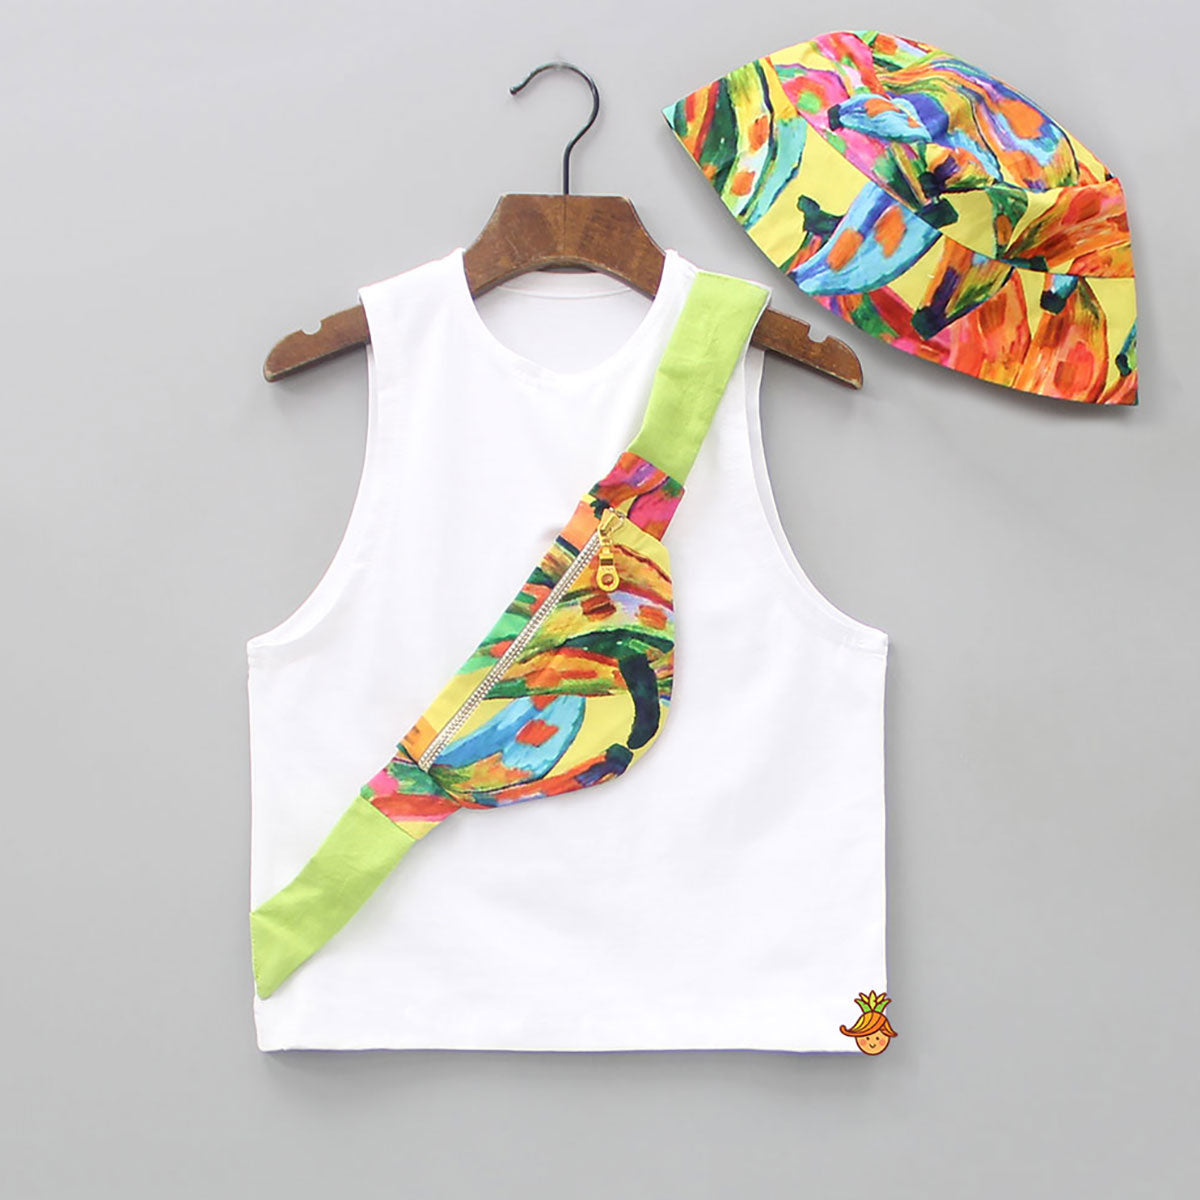 Pre Order: White Tee With Attached Multicolour Printed Bag And Matching Cap